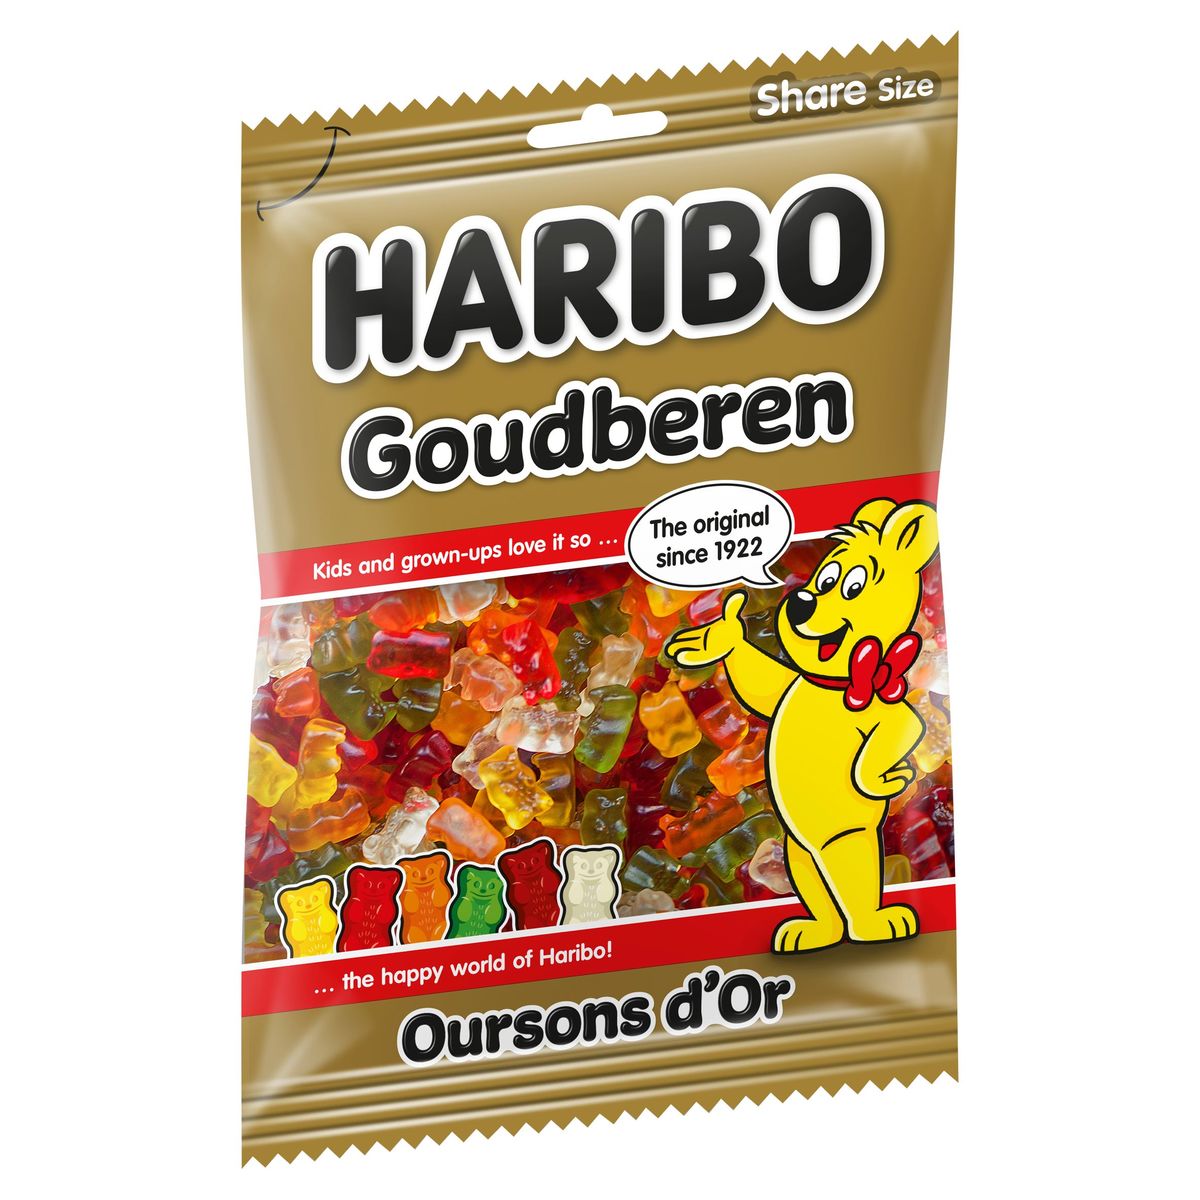 Haribo Oursons d'Or 250 g